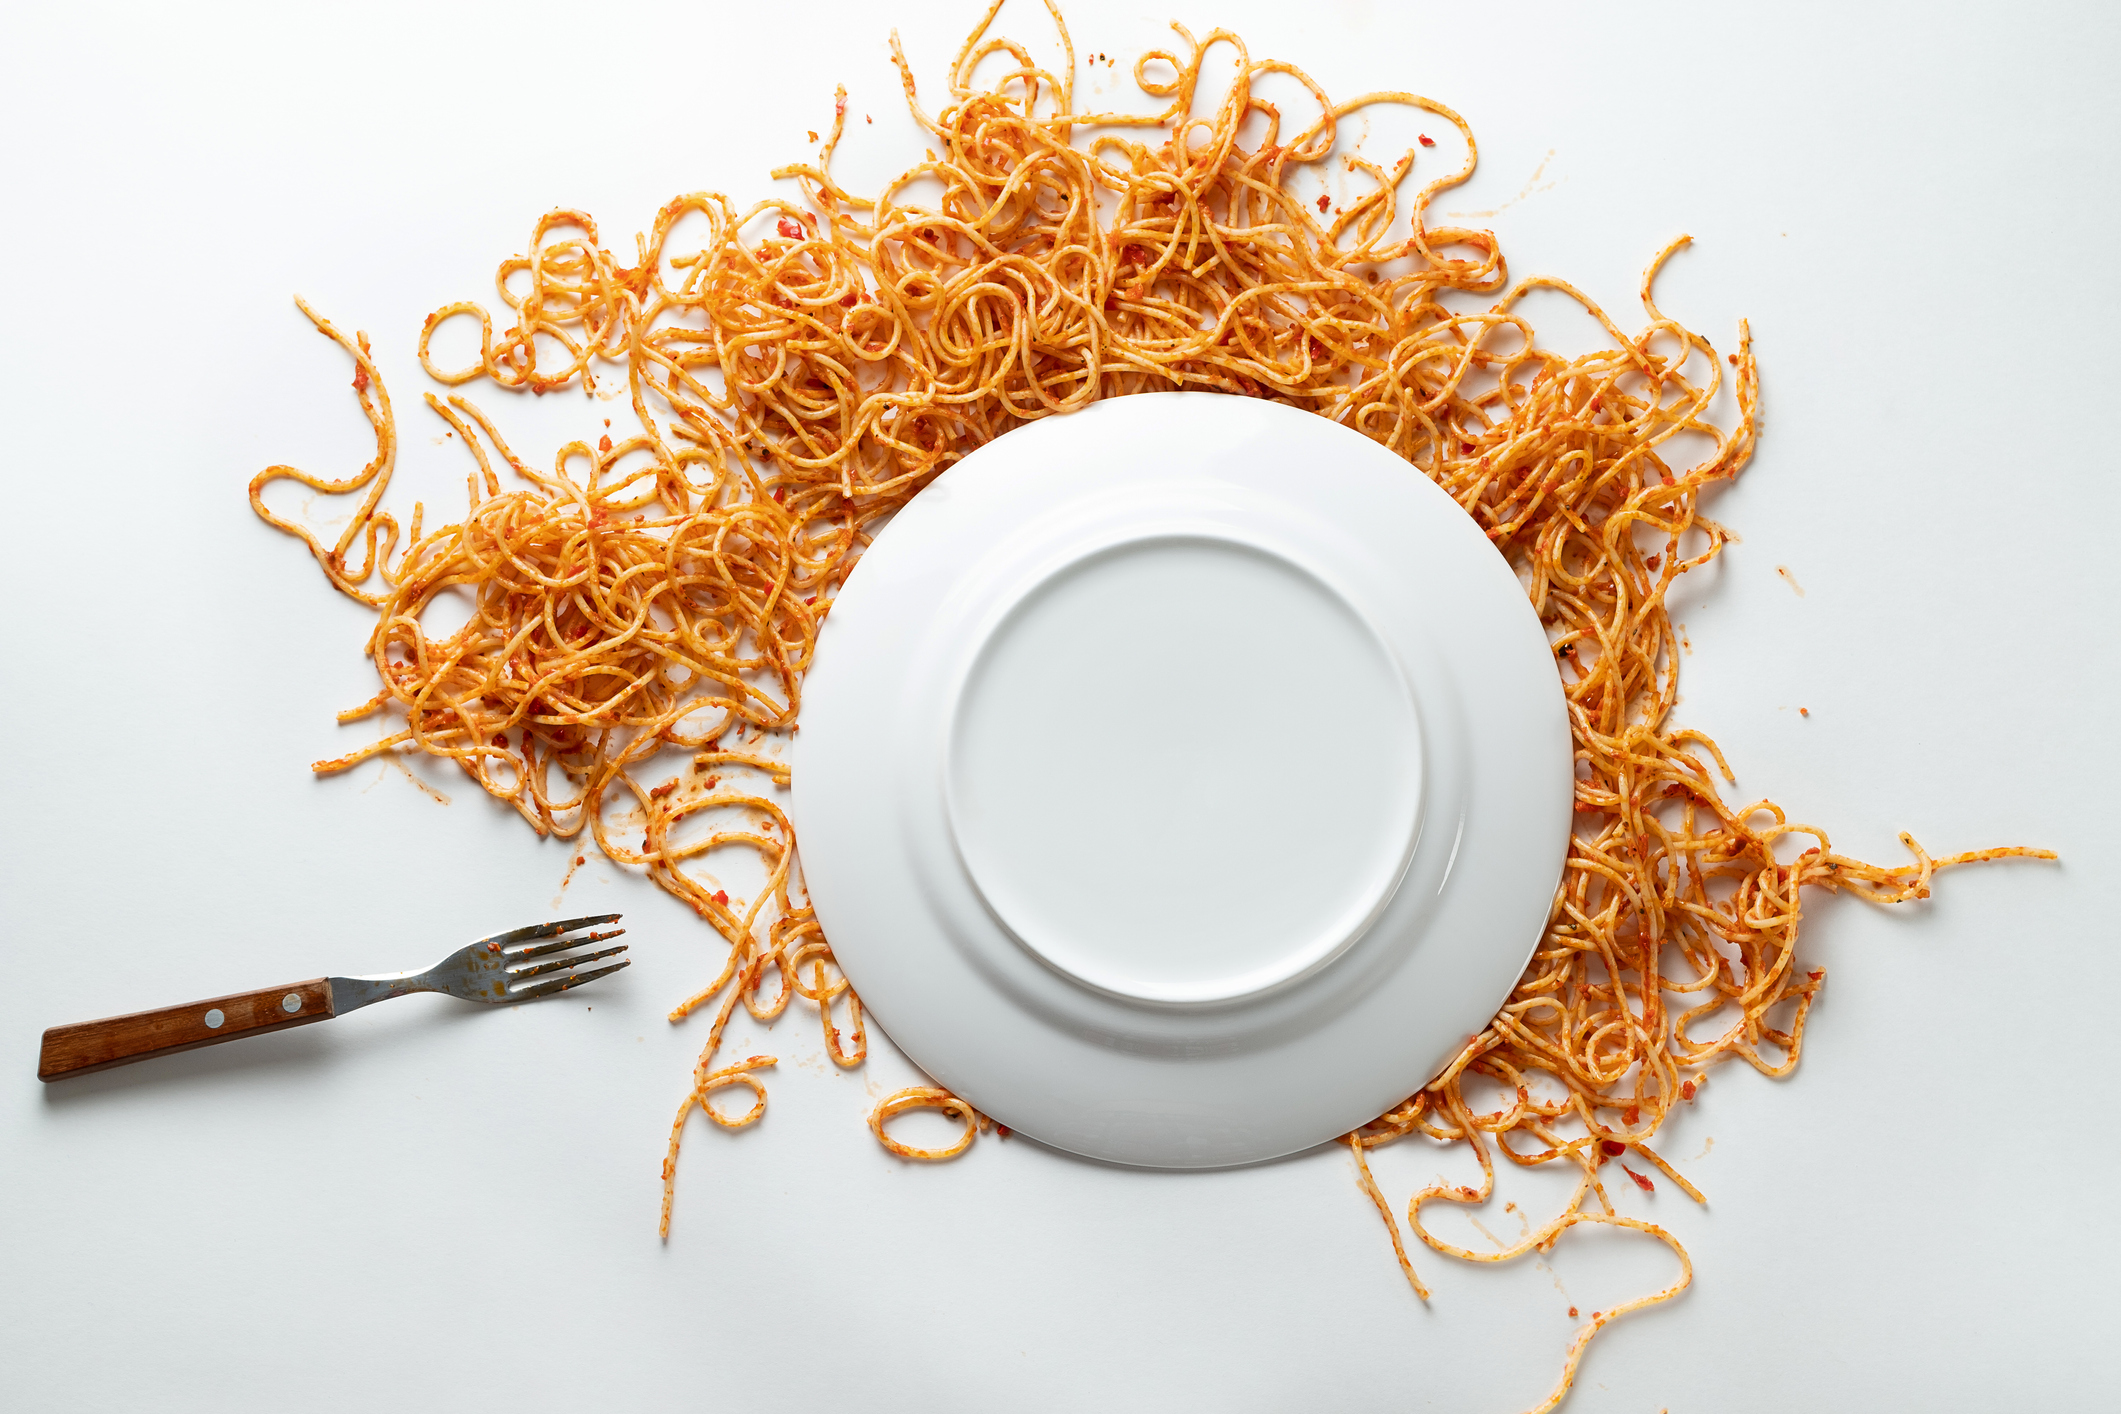 A fallen white ceramic plate of spaghetti, with a fork beside it. Pasta bolognese in tomato sauce is scattered on a white background or table. The concept of vegetarian and vegan food. Food background. Copy of the text space.